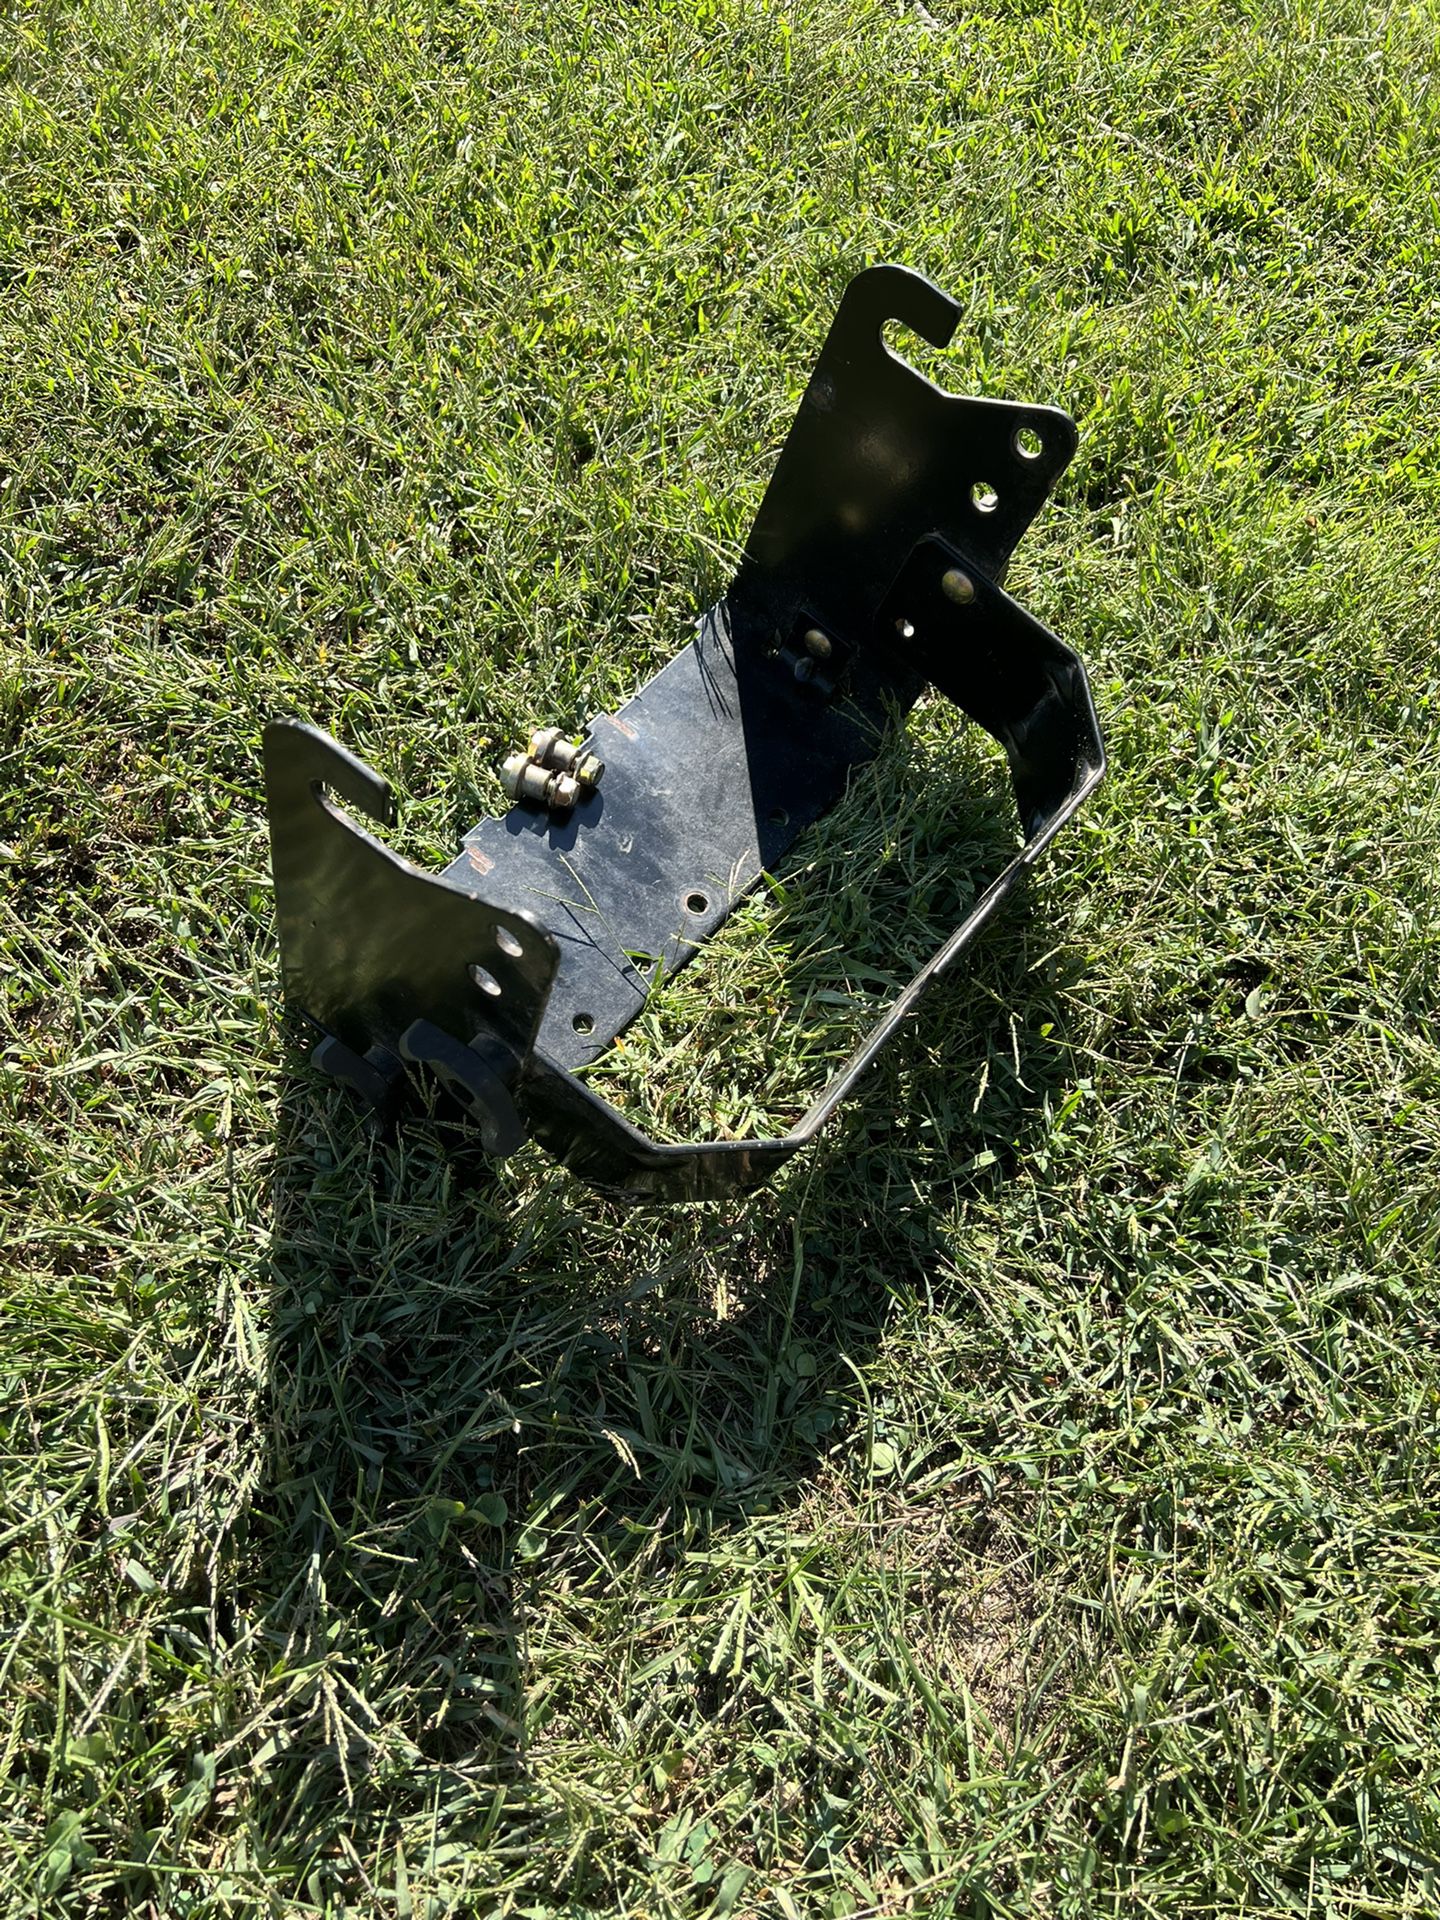 Riding Mower Trailer Hitch